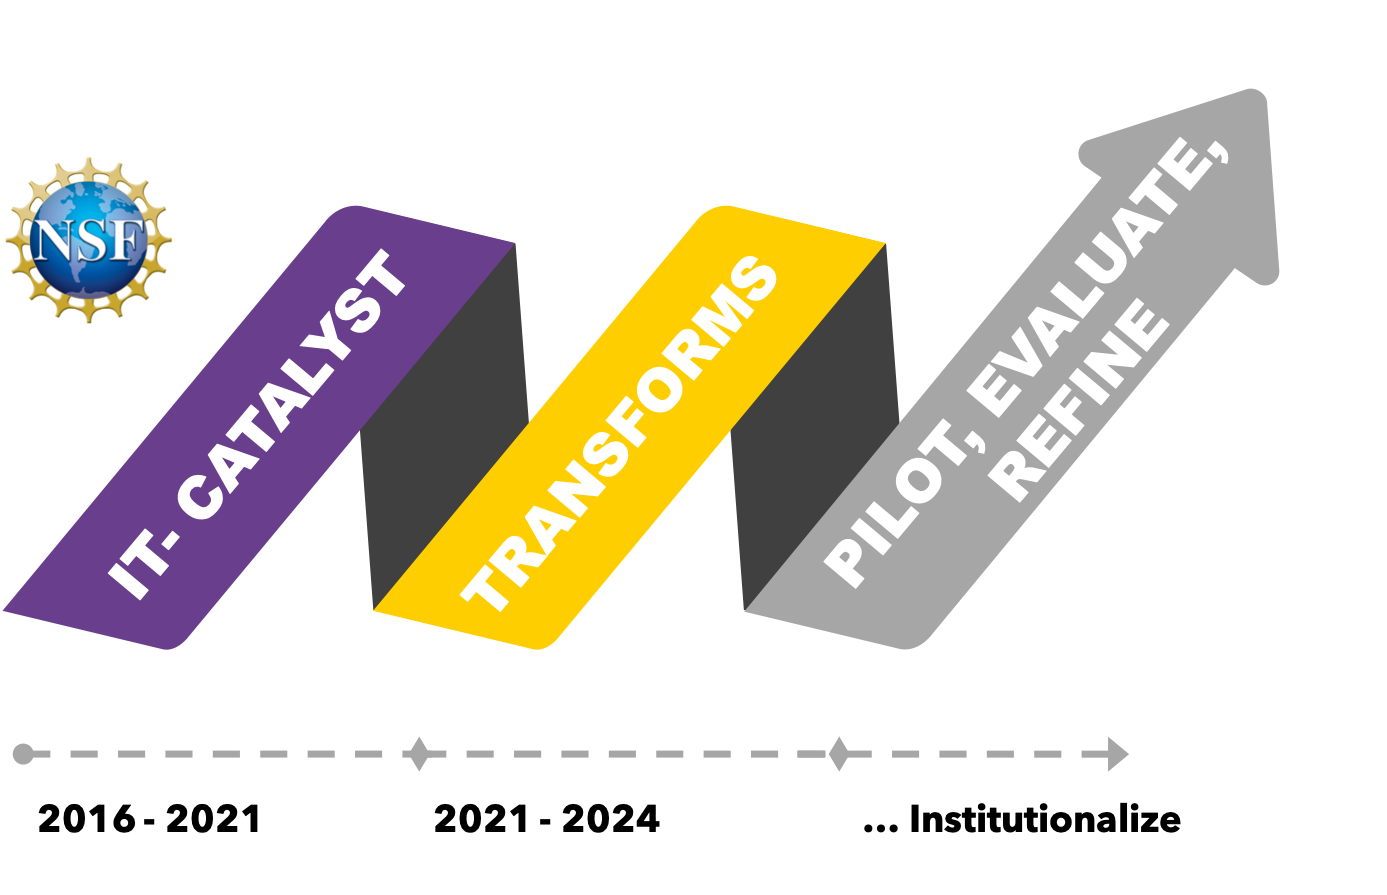 Timeline of IT Catalyst, Transform, and Pilot phases, from 2016 into future with NSF logo